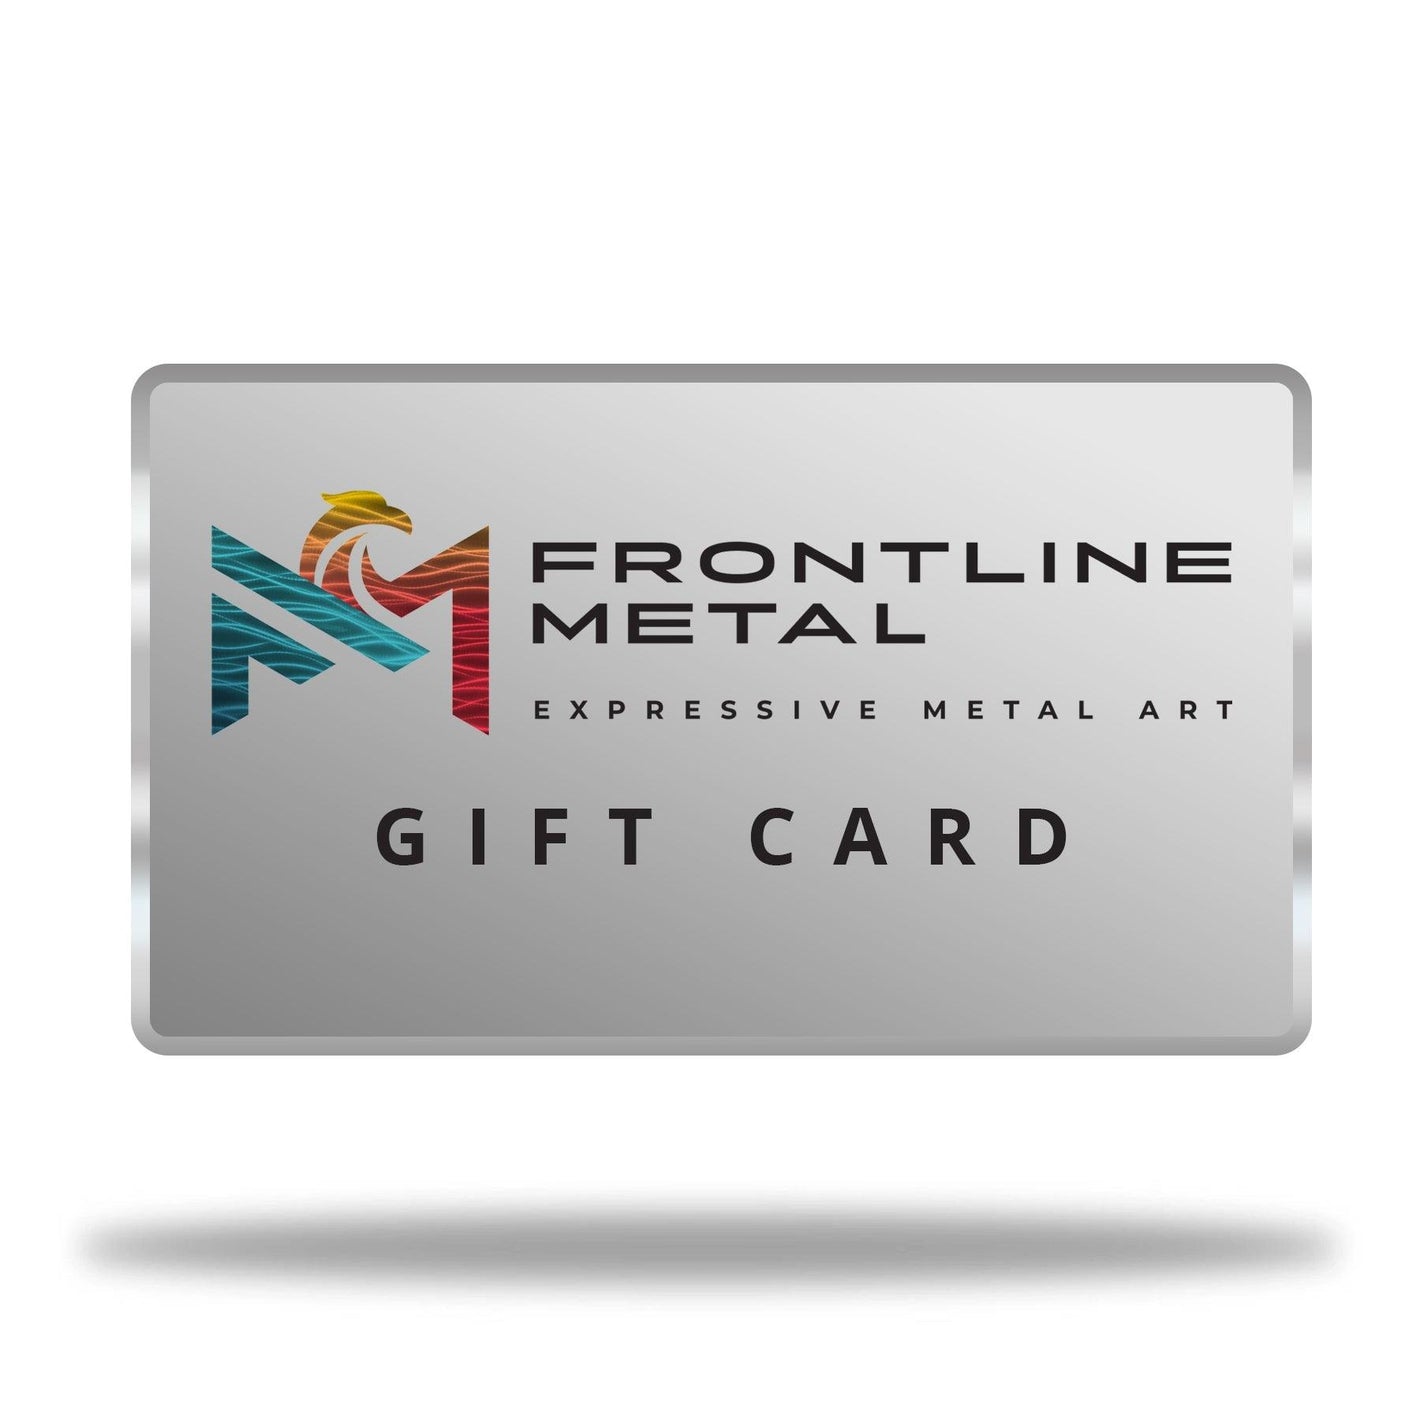 Gift Card - Frontline Metal Electronic Gift Card